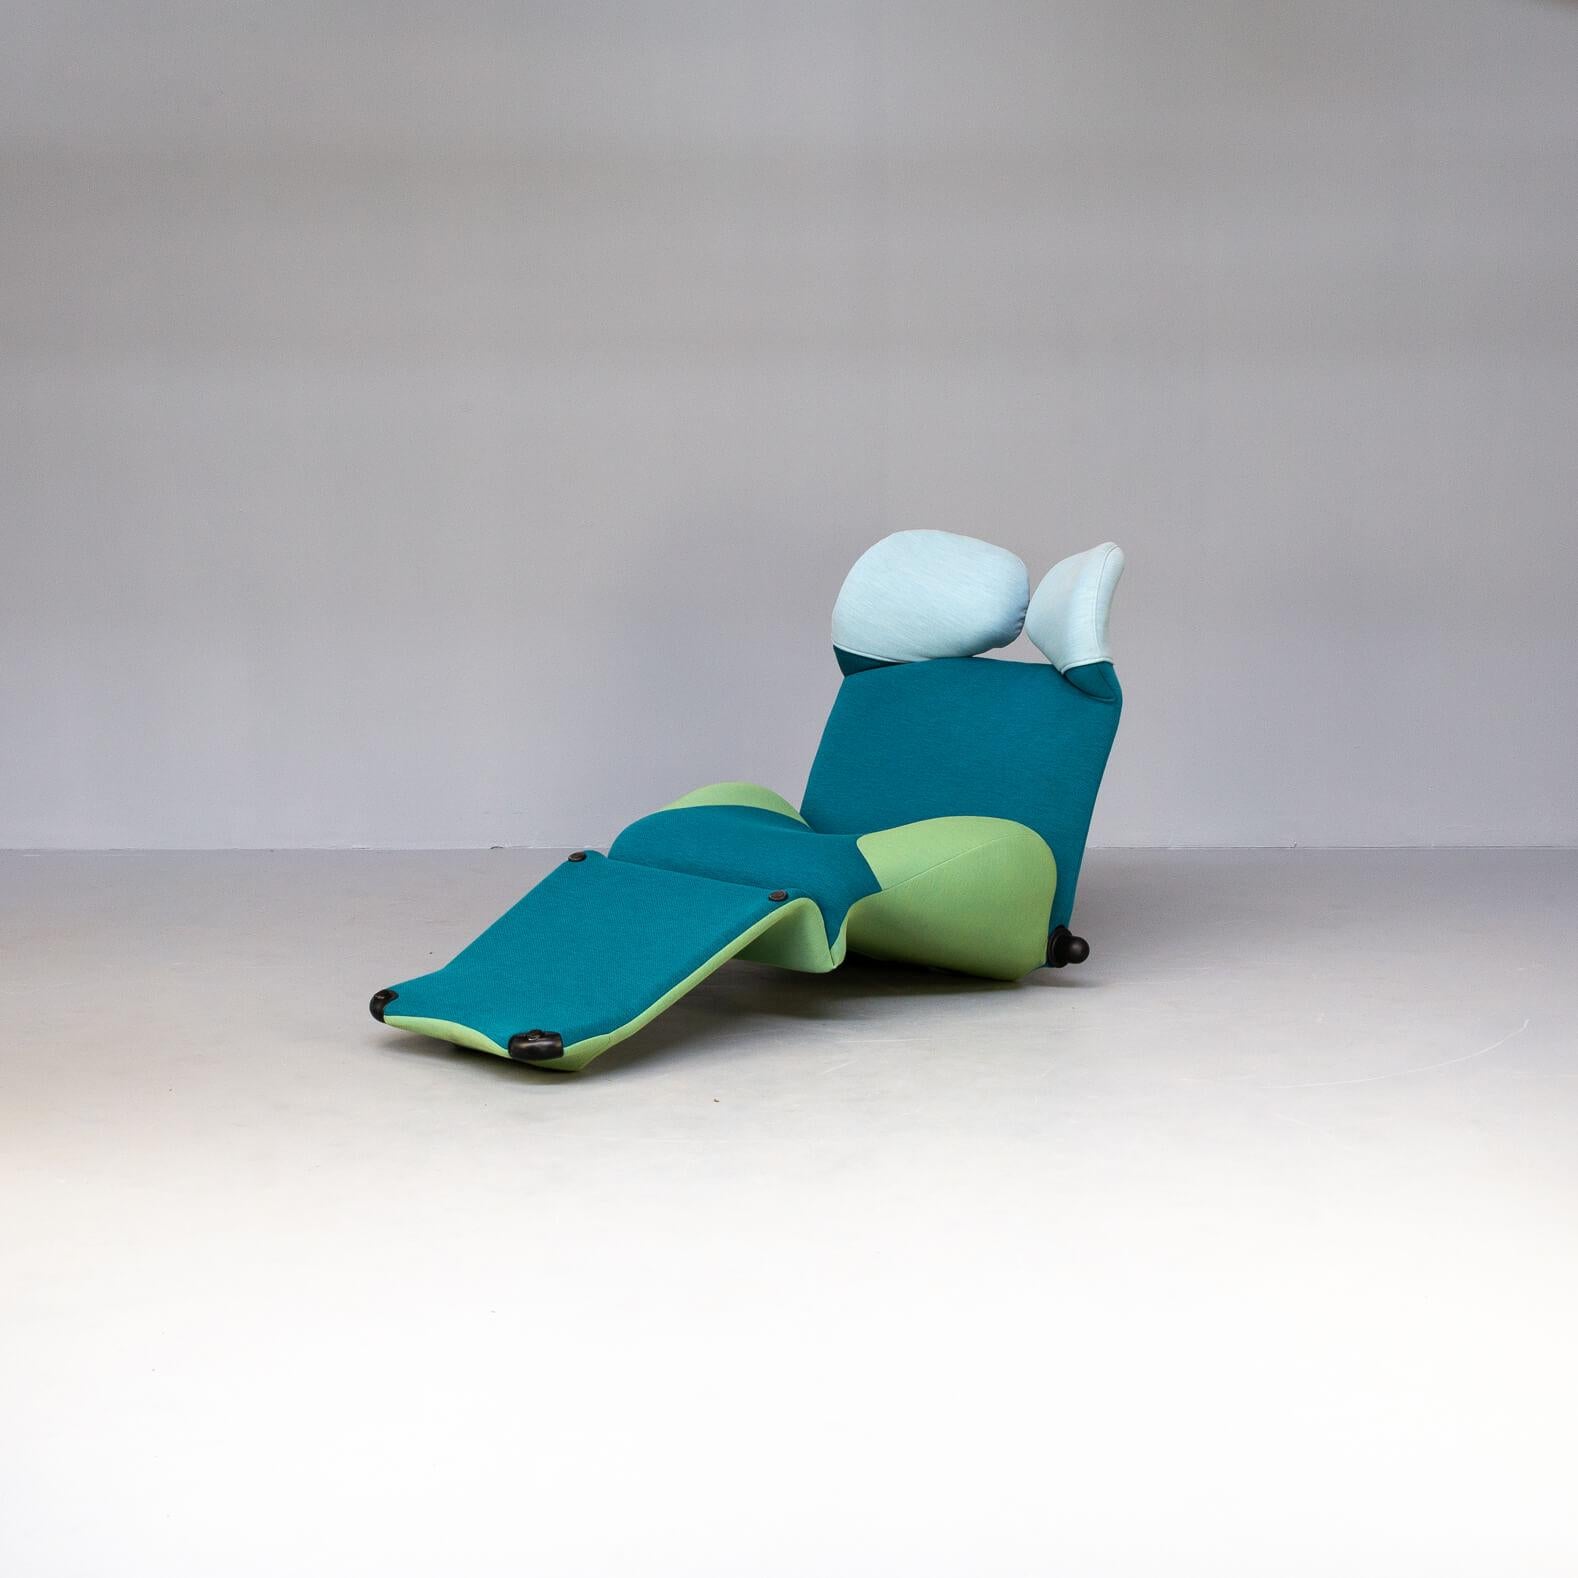 Toshiyuki Kita designed the ‘wink’ fauteuil in 1980 for Cassina.
Stretch your legs and lie down or sit. The headrest can be moved freely, and the colored covers on each part can be switched as easily as changing clothing and washed at home, lending